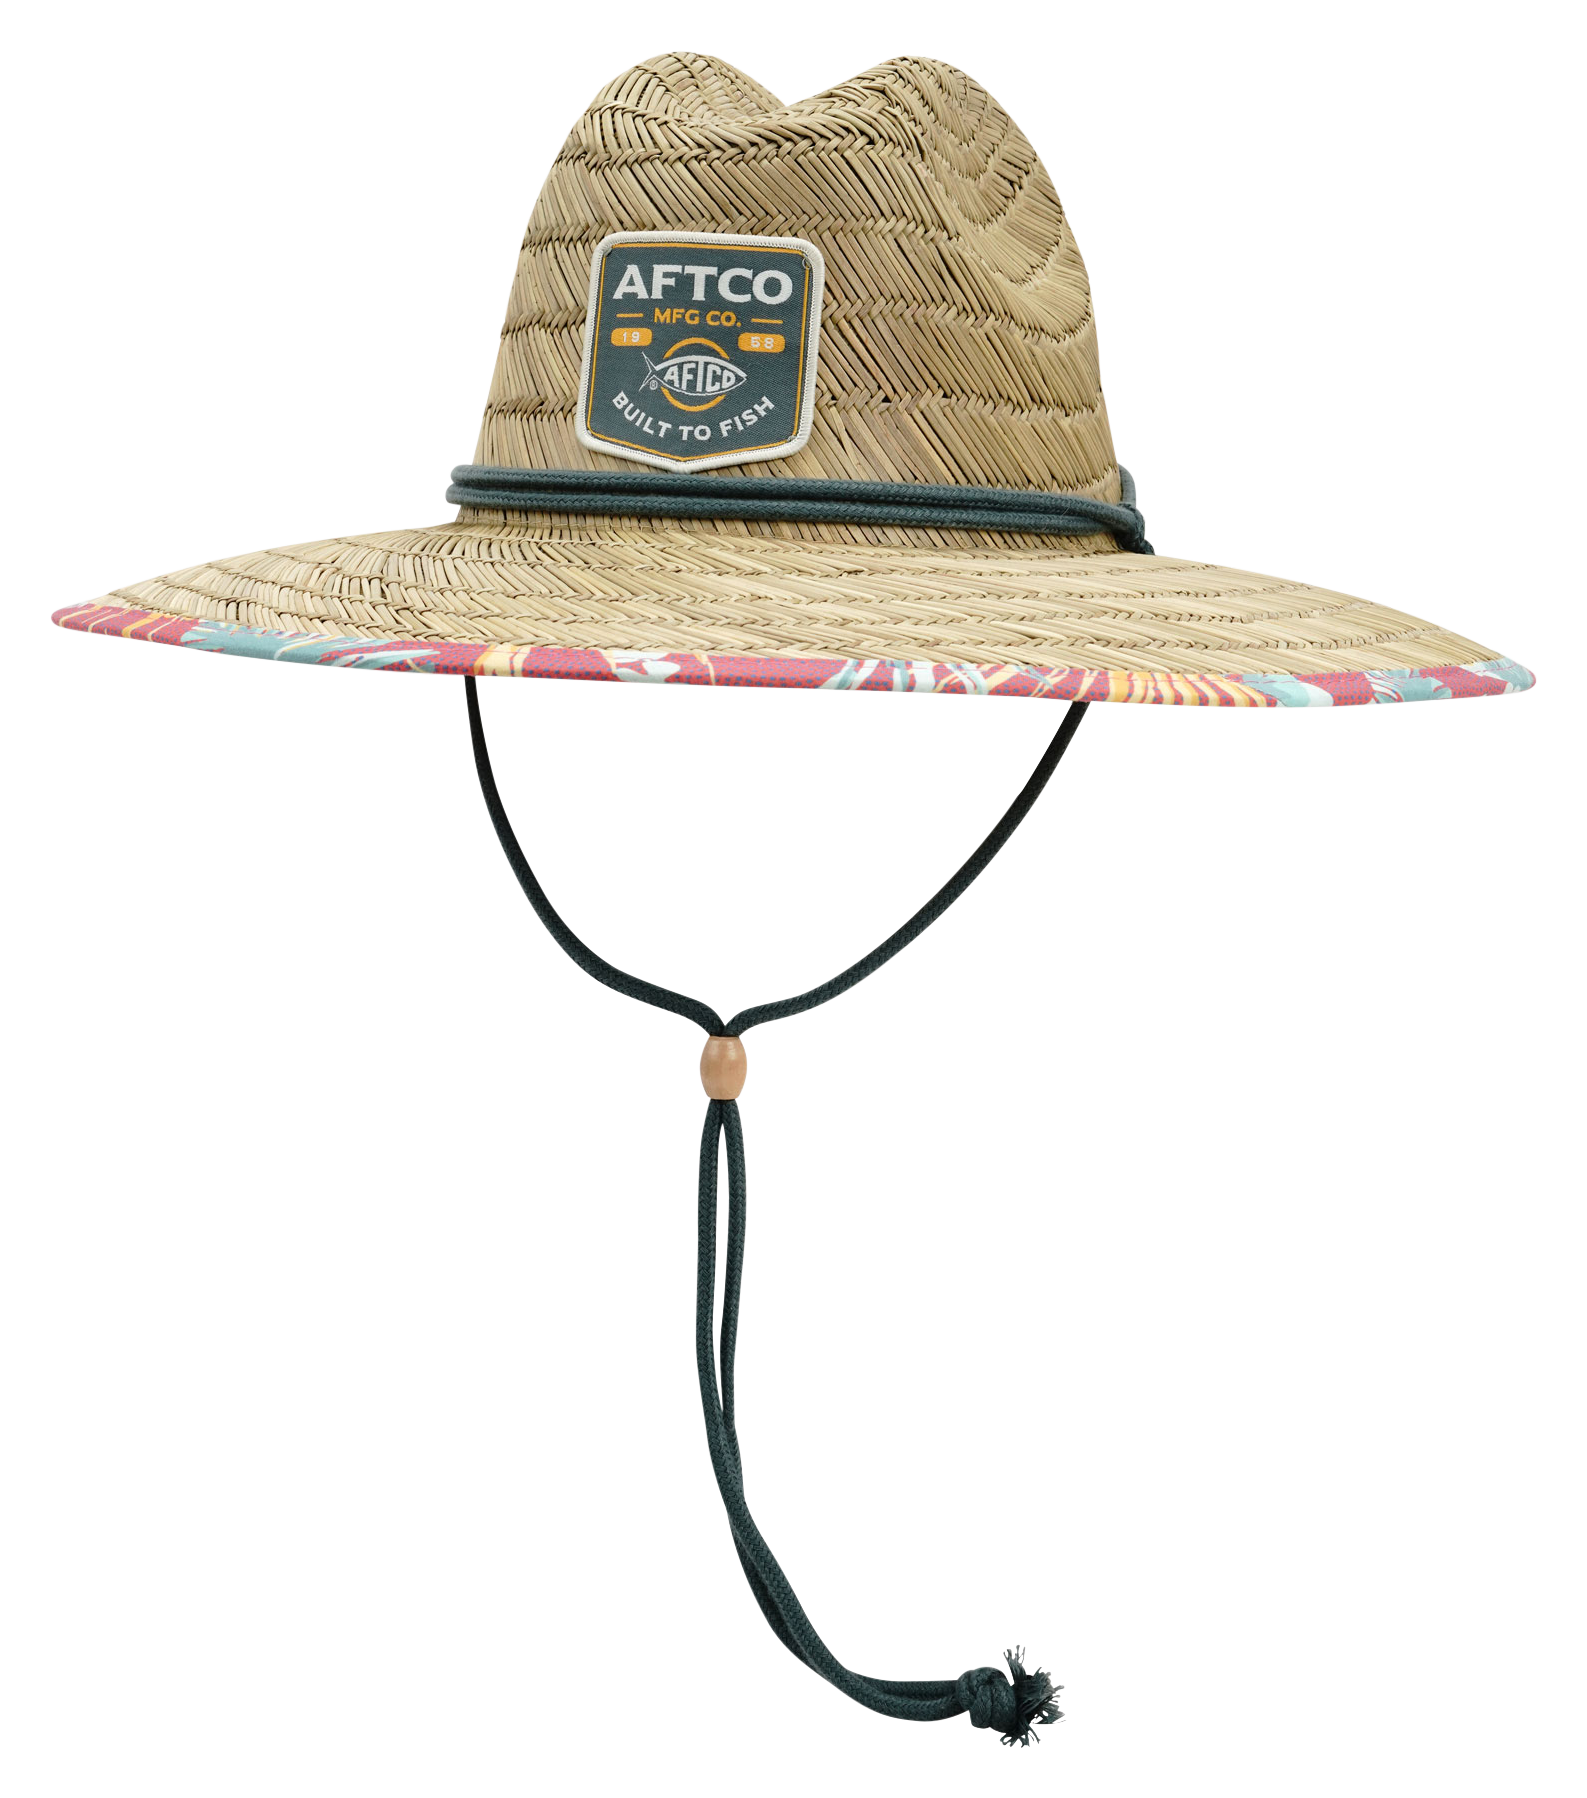 AFTCO Boatbar Floral Straw Hat